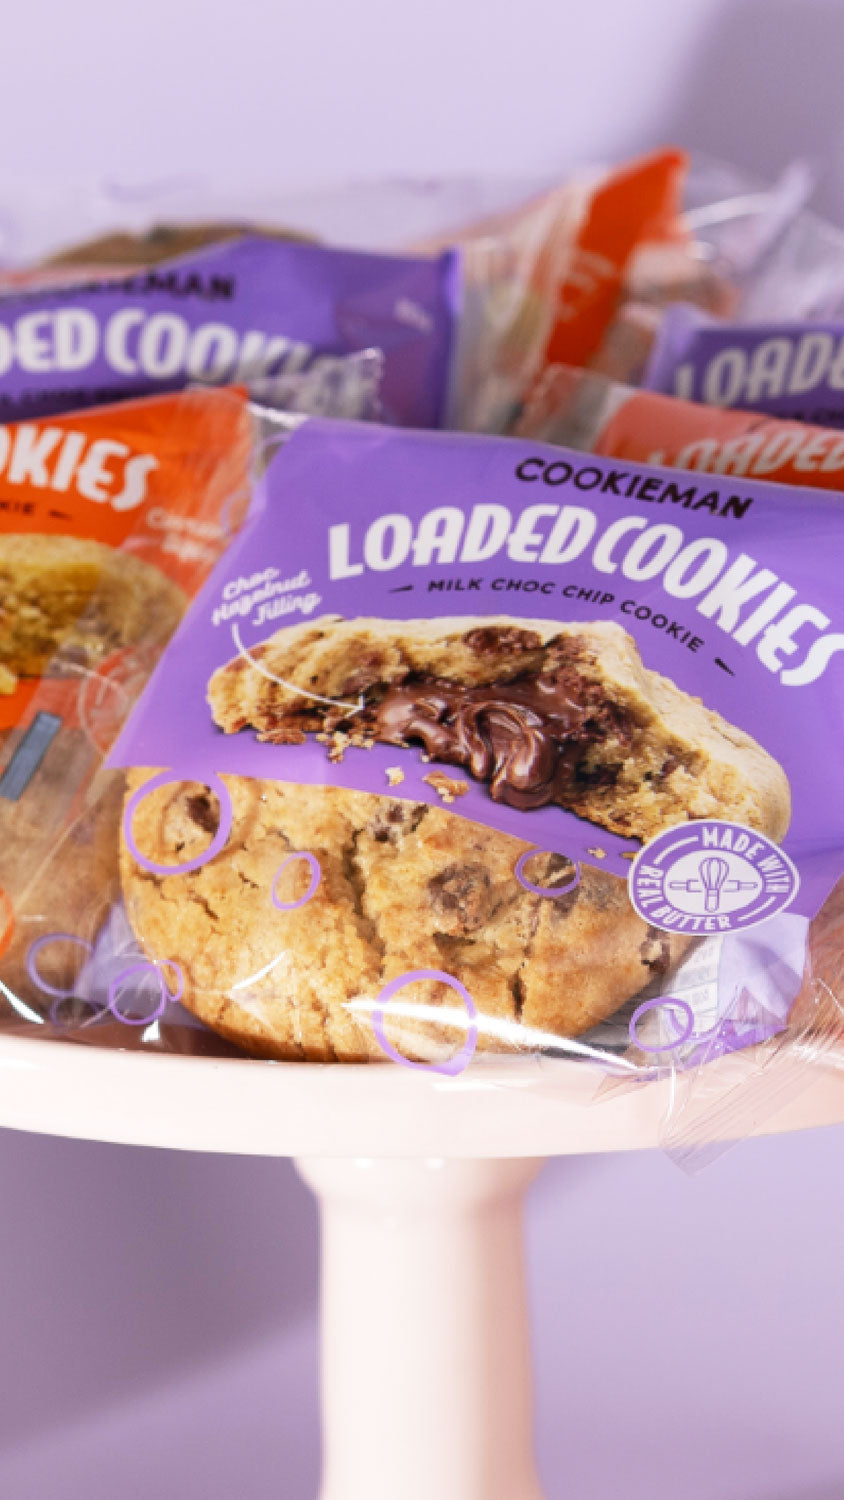 purchase cookies online